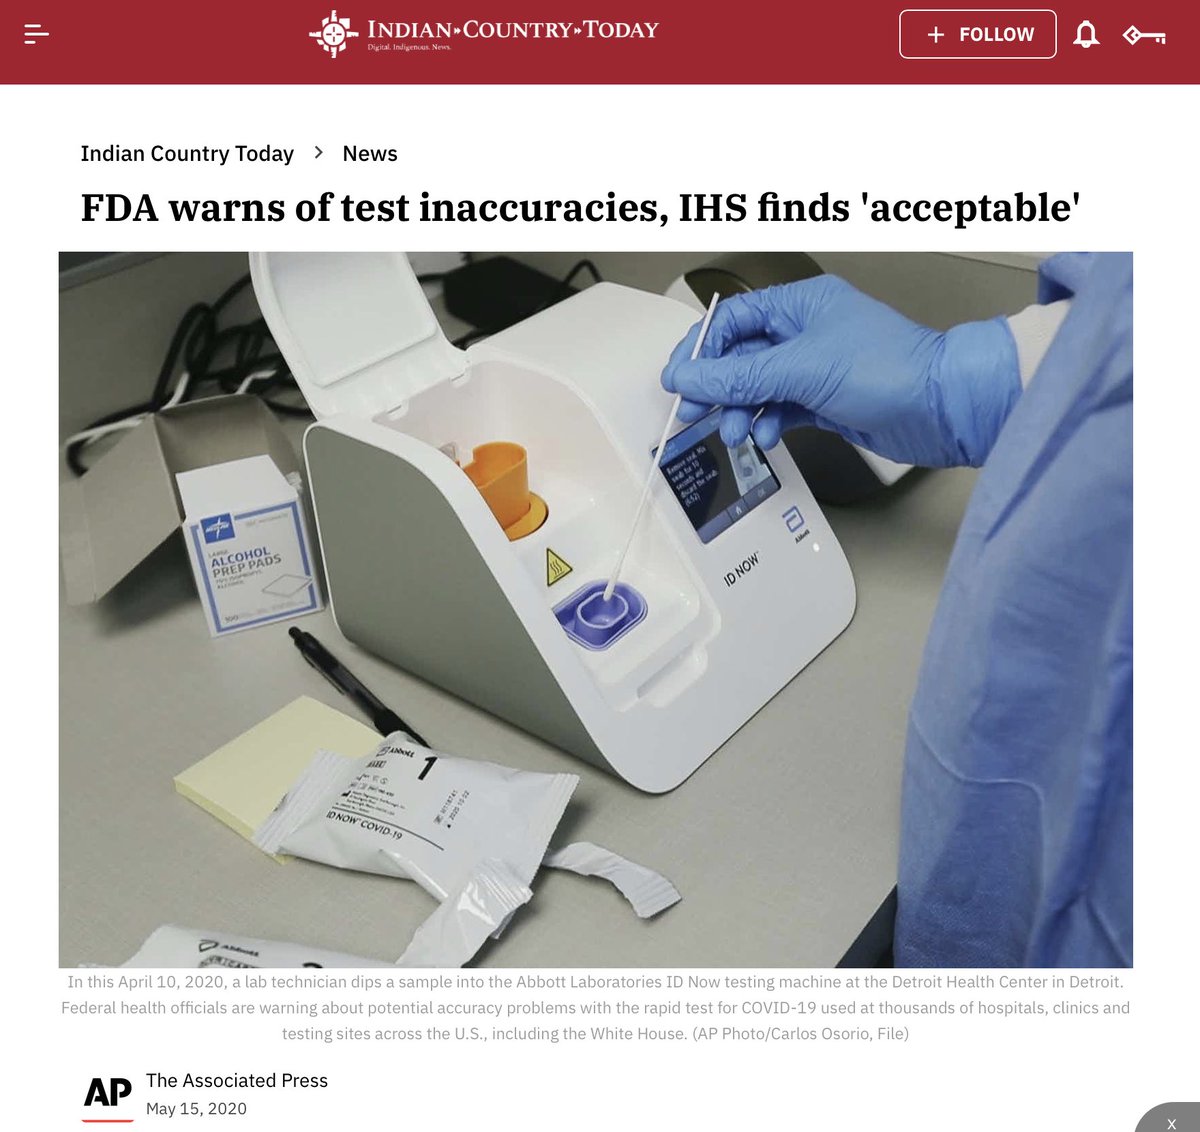 Furthermore: why did HHS deem it appropriate to effectively circumvent the FDA by instructing IHS continue using the Abbott ID NOW system as-is? https://indiancountrytoday.com/news/fda-warns-of-test-inaccuracies-ihs-finds-acceptable-r-44VHfUGkG8NFYVVwhgFw